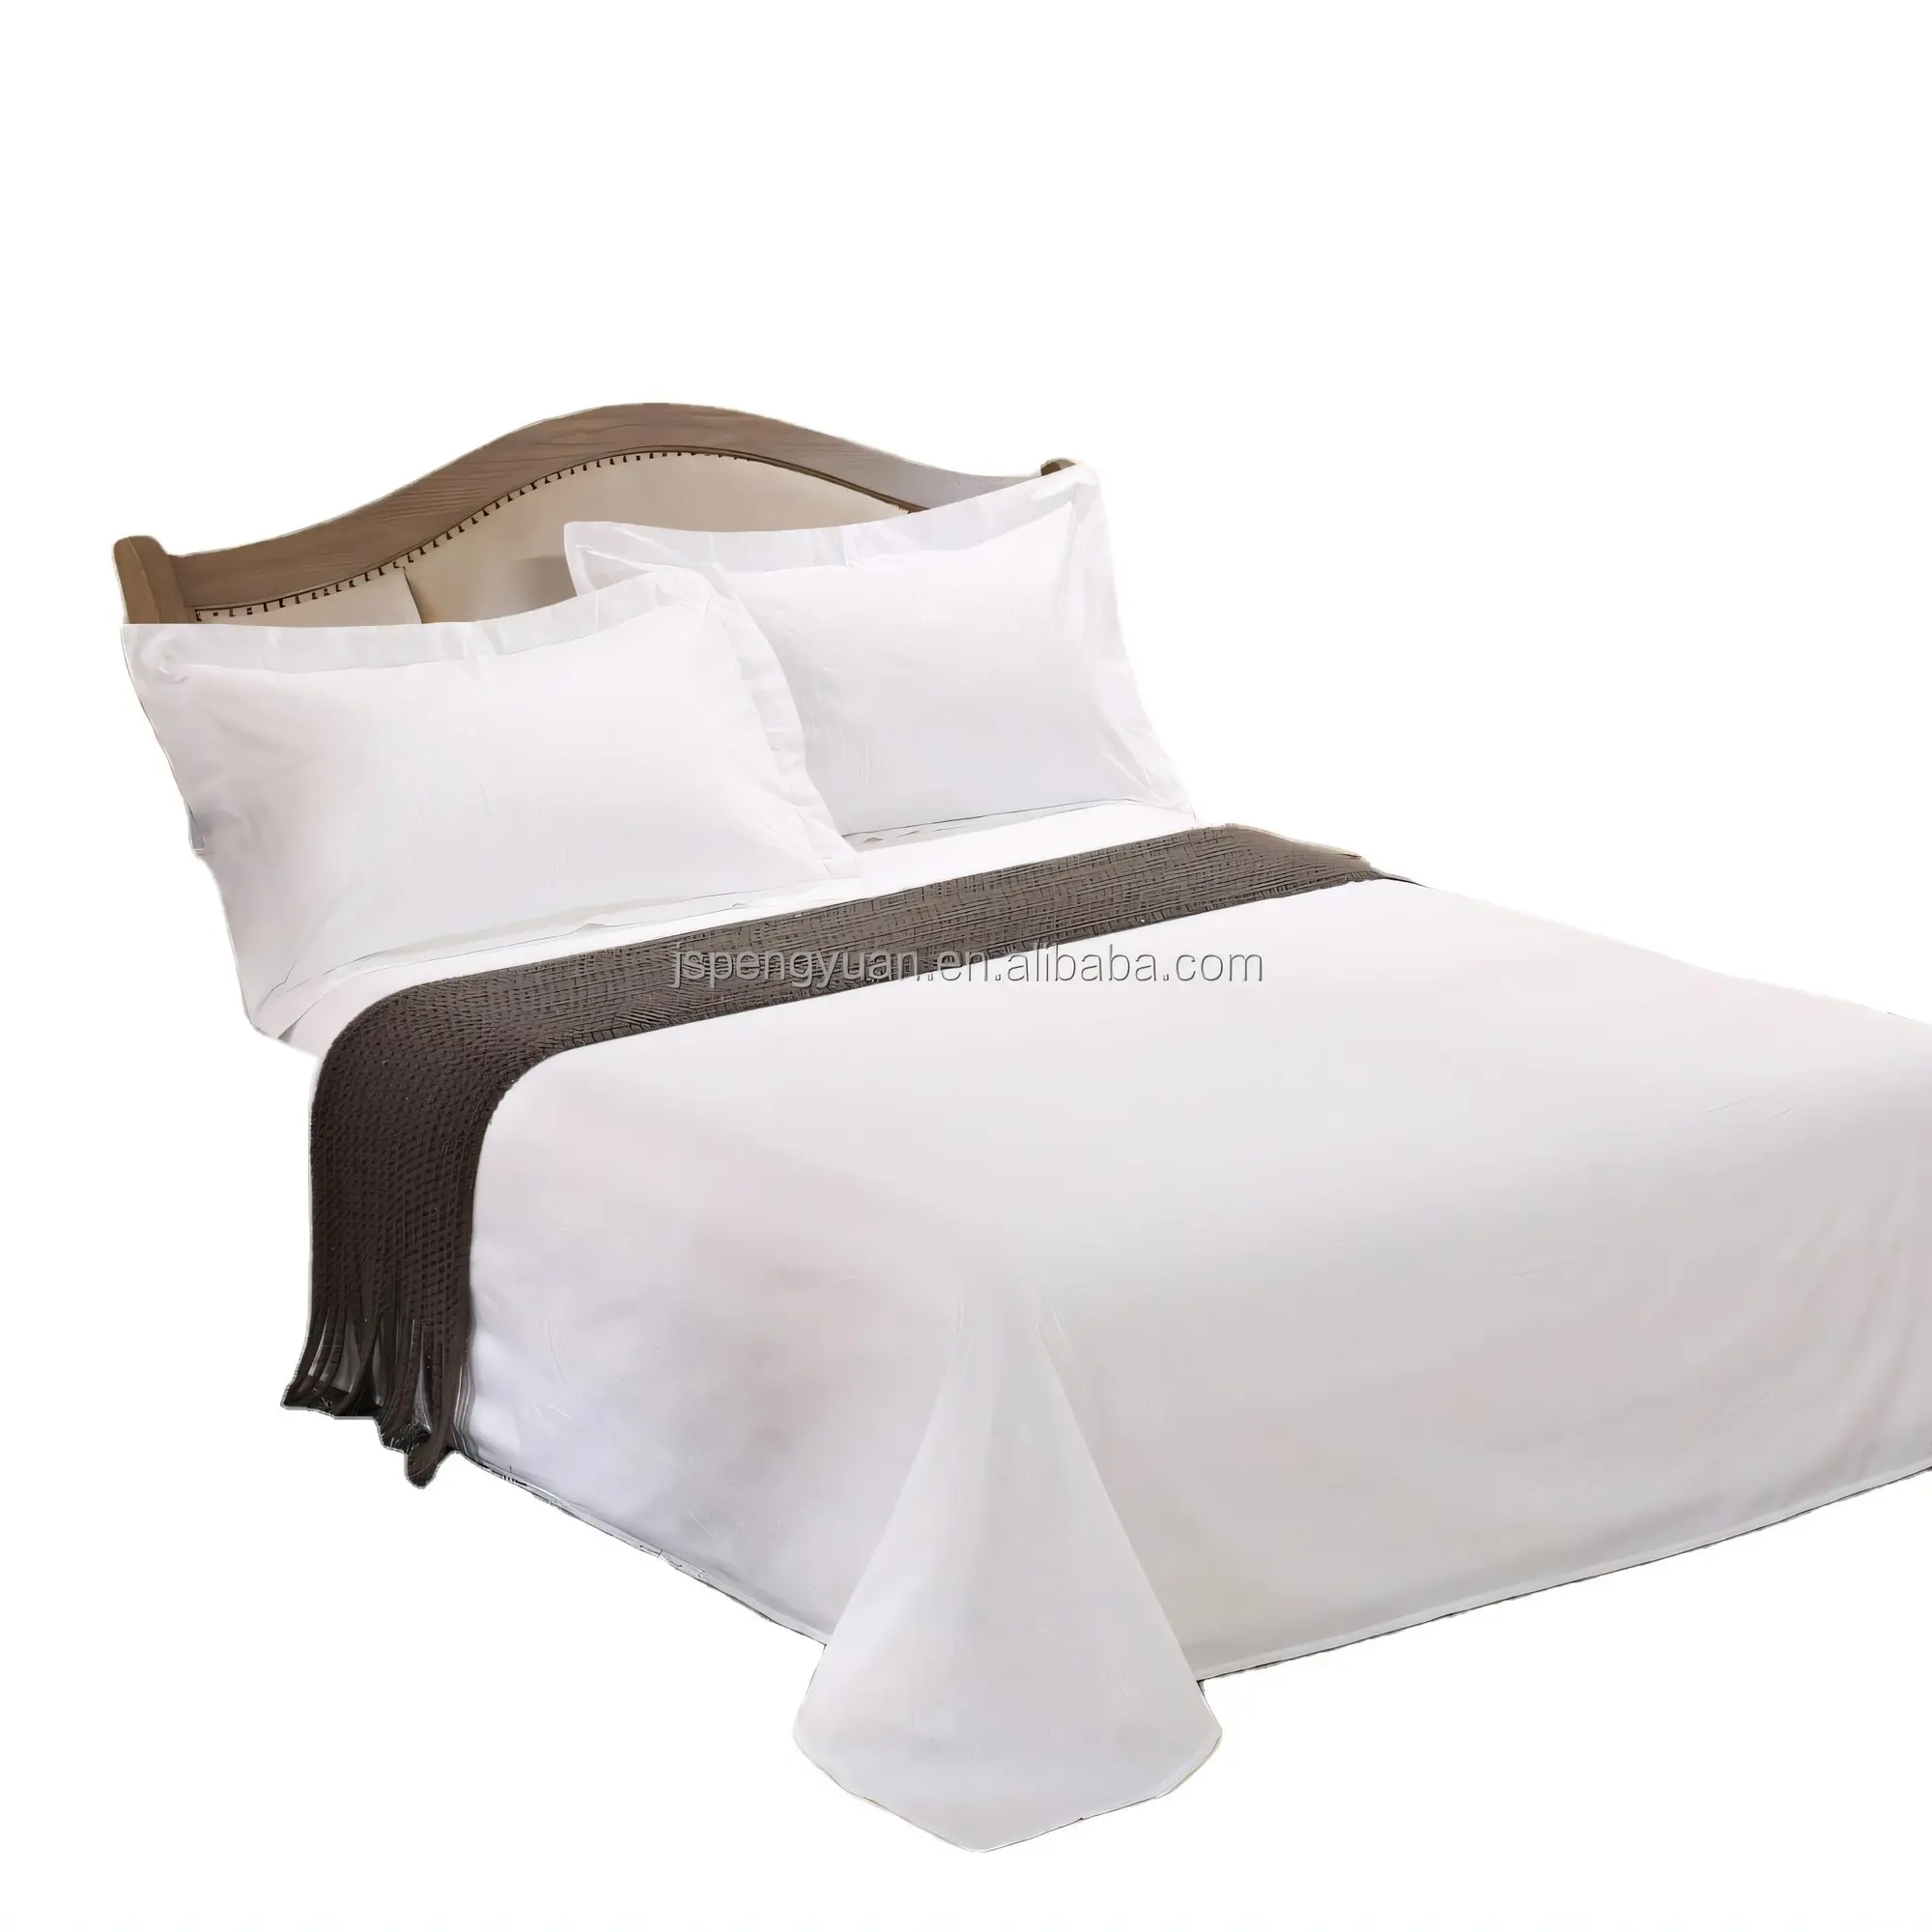 Fine quality high hotel cheap bed sheets sets